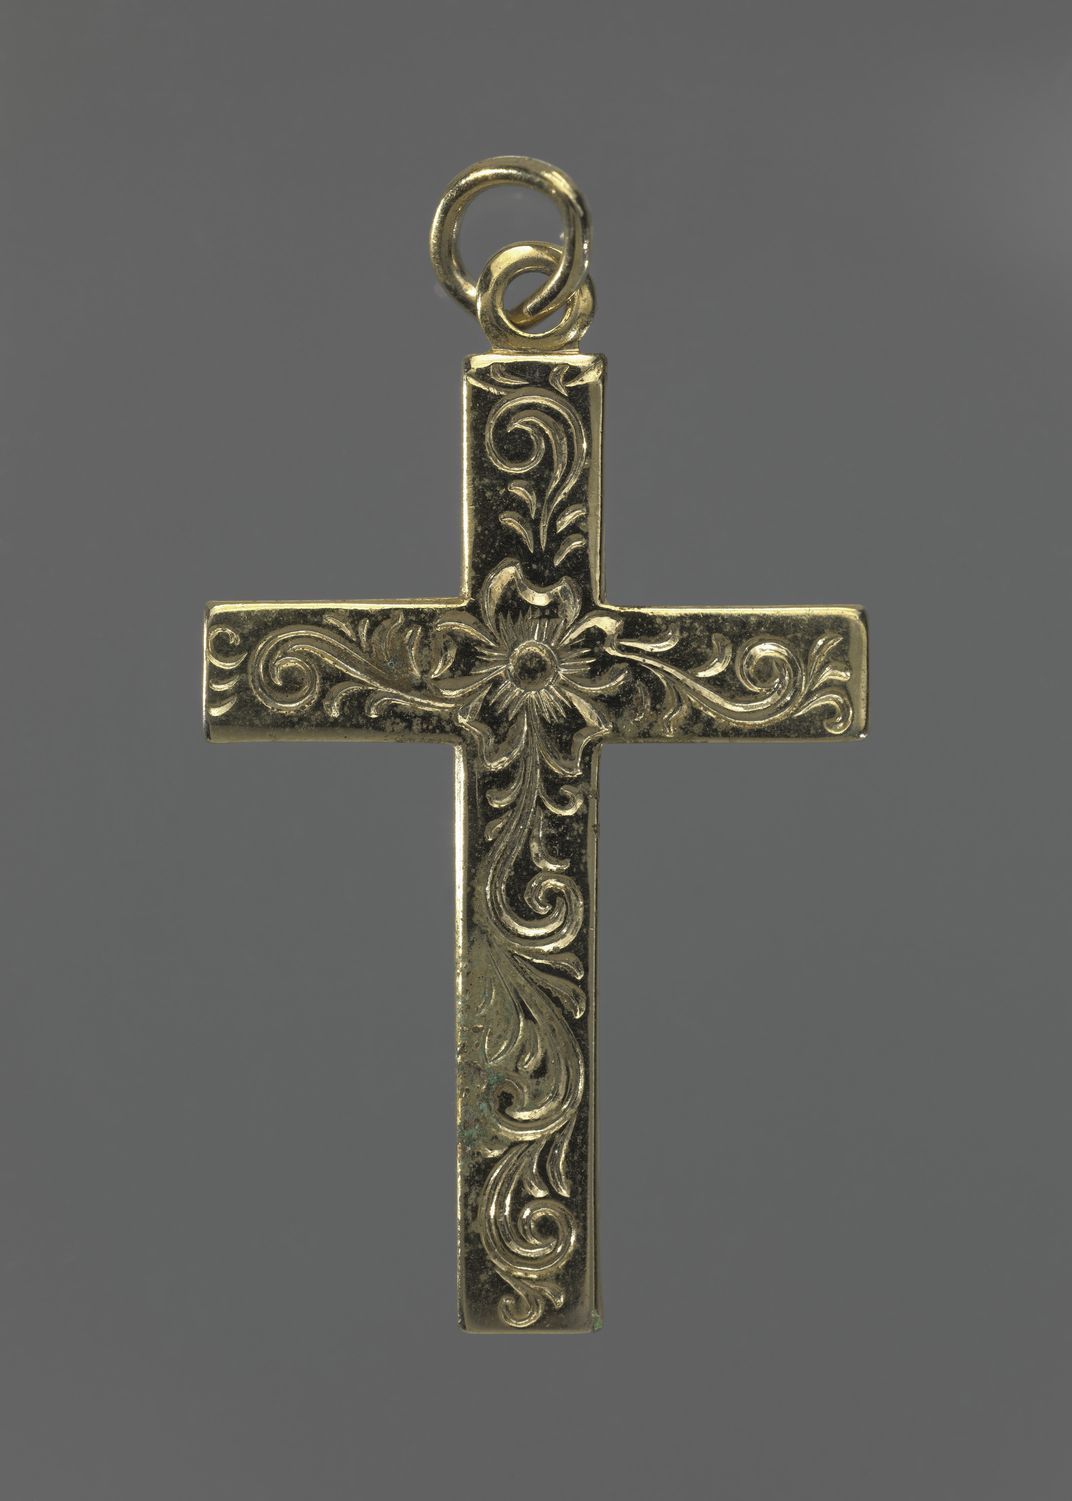 A cross pendant owned by Mary Church Terrell